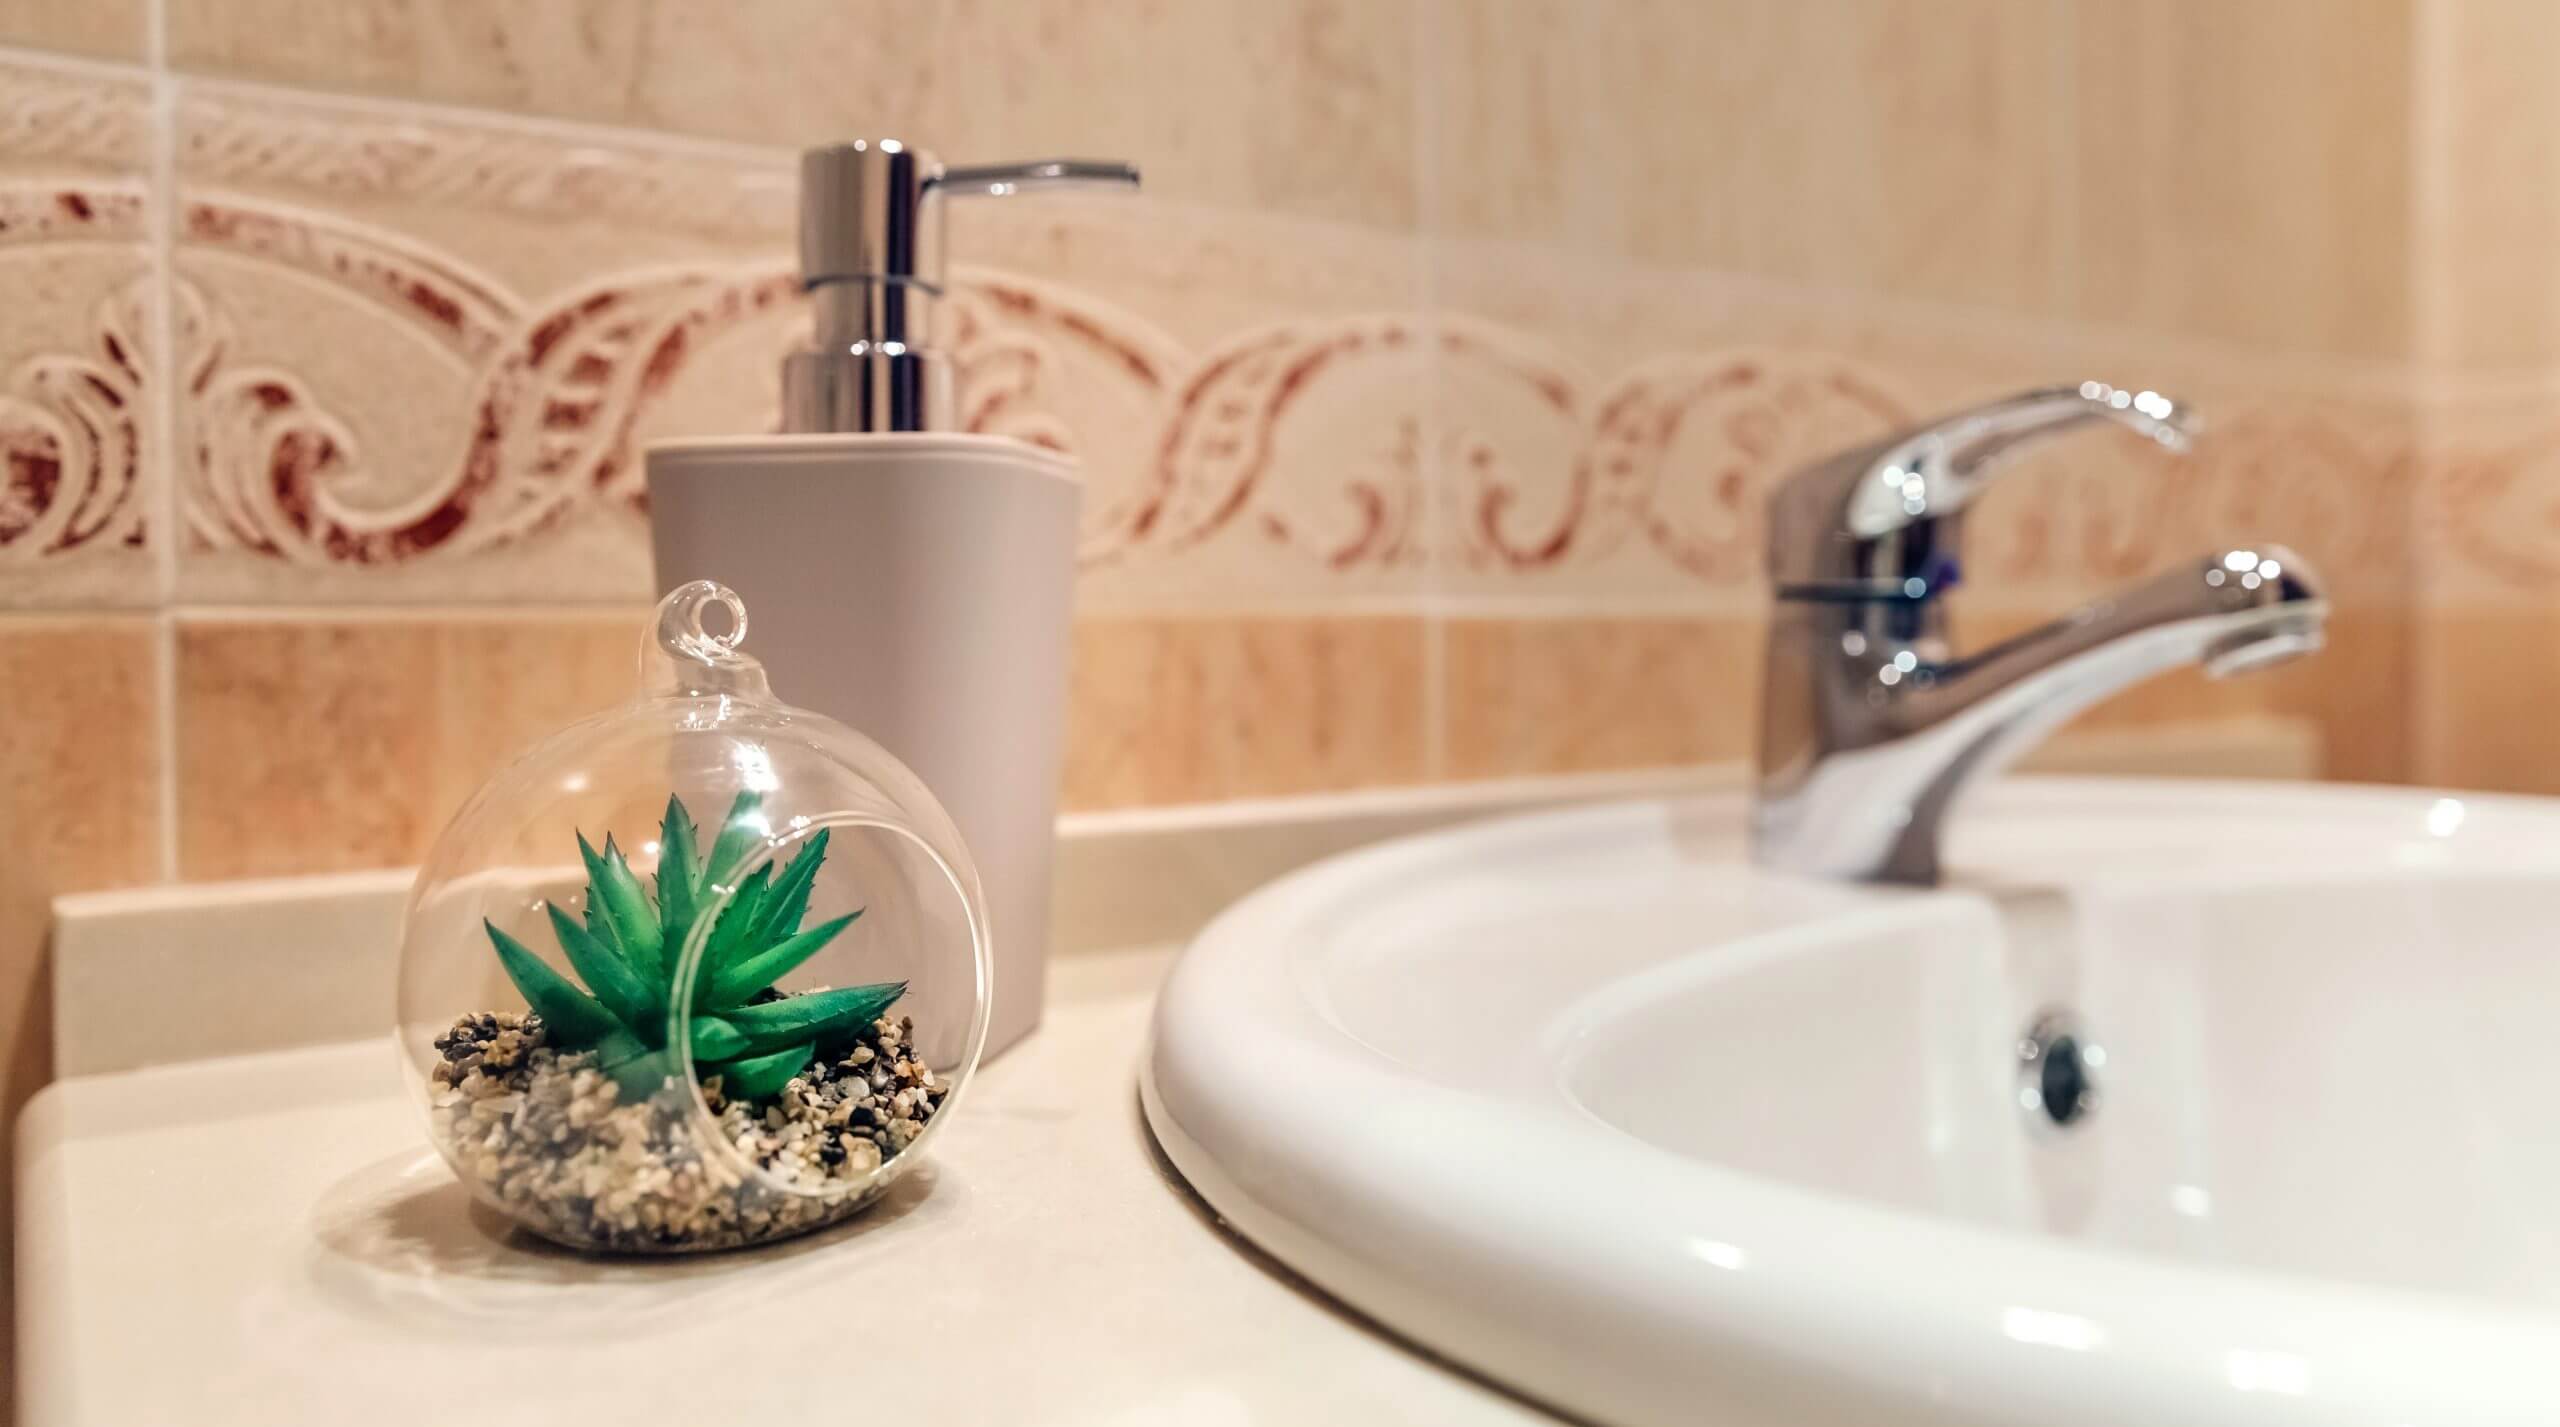 Washbasin with tap, soap dispenser and plant